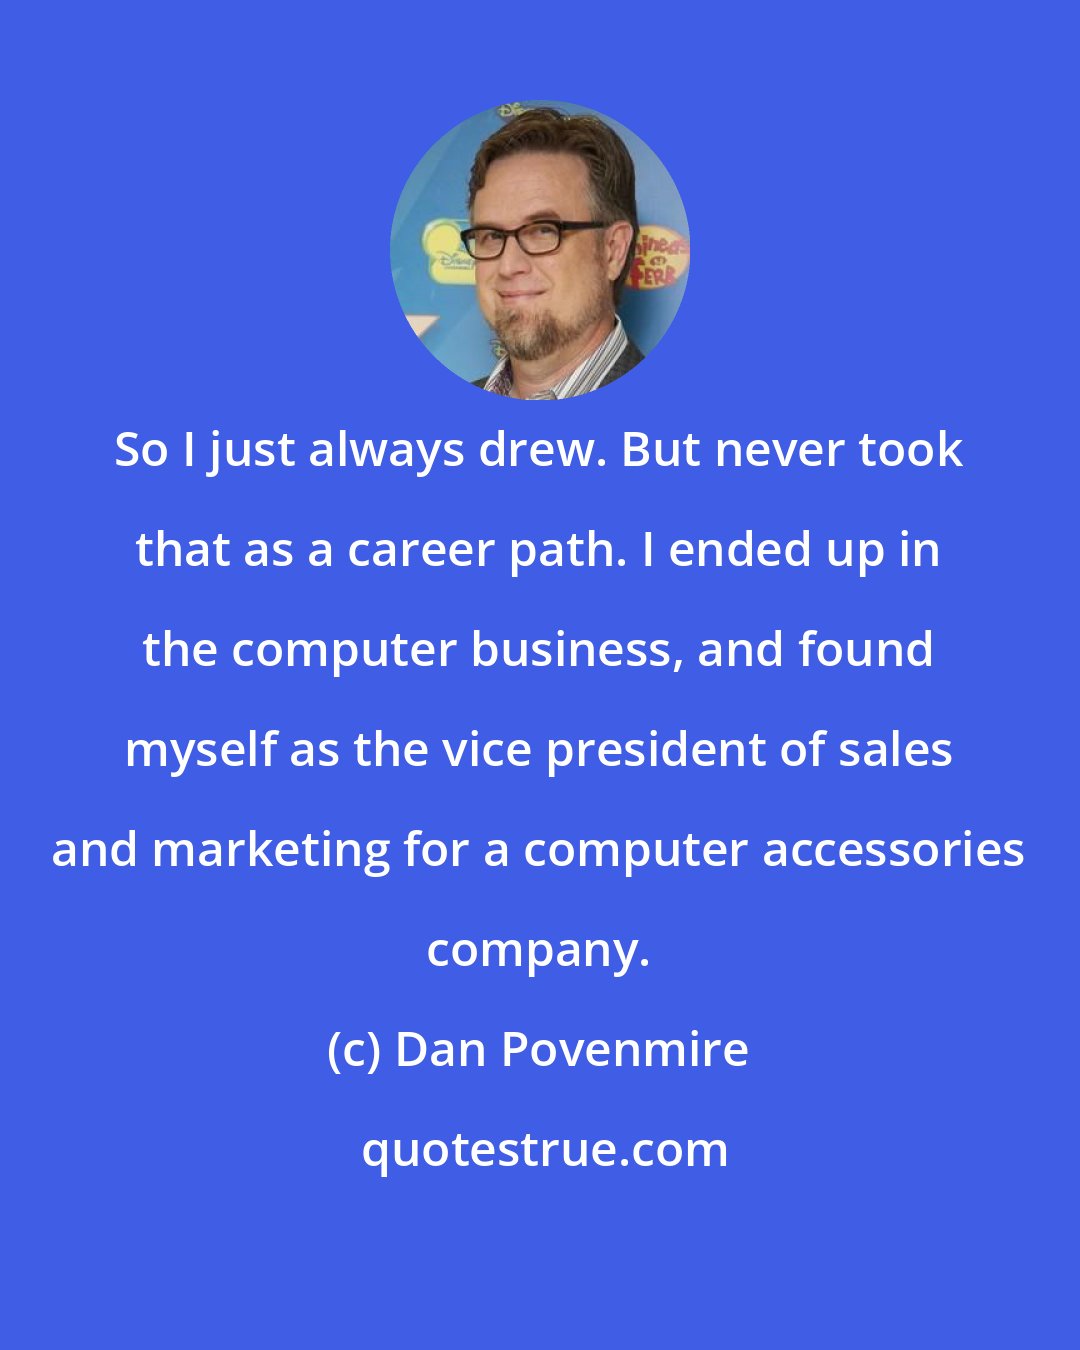 Dan Povenmire: So I just always drew. But never took that as a career path. I ended up in the computer business, and found myself as the vice president of sales and marketing for a computer accessories company.